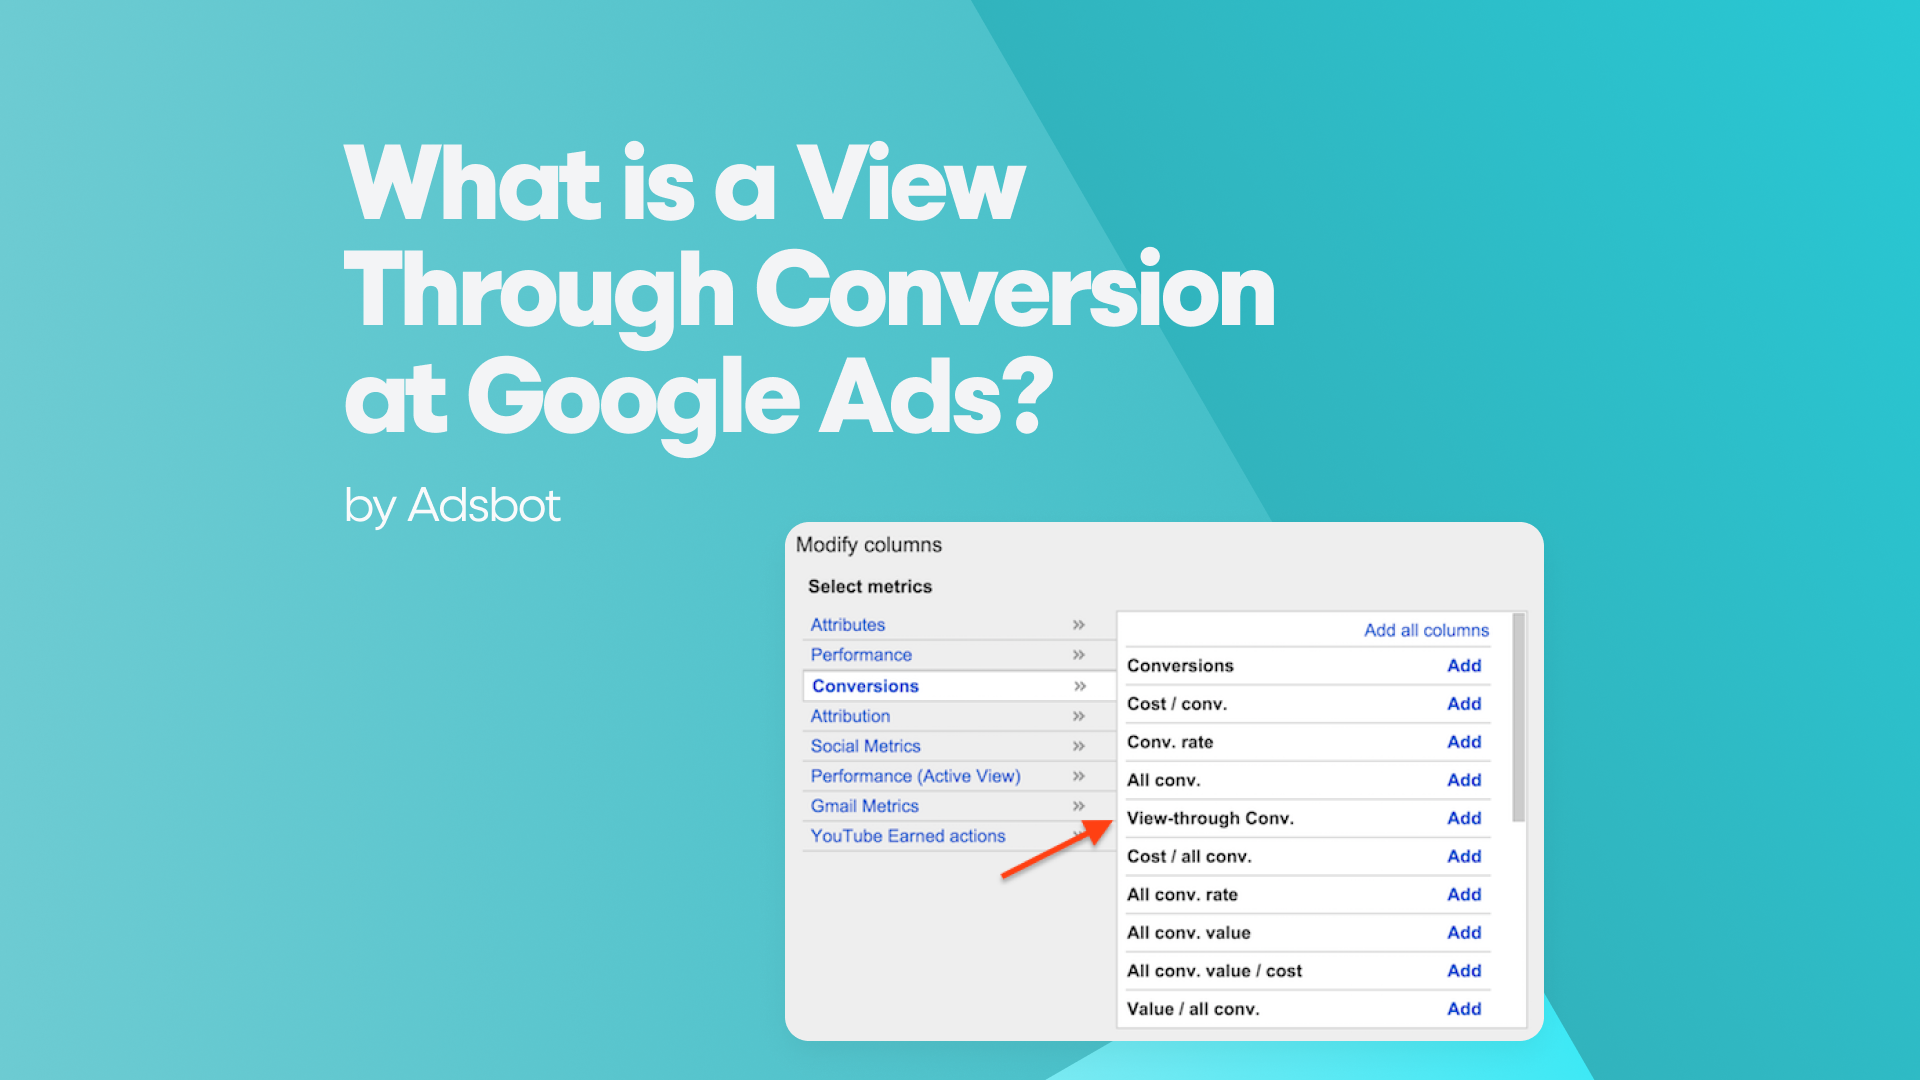 What is a View Through Conversion at Google Ads?